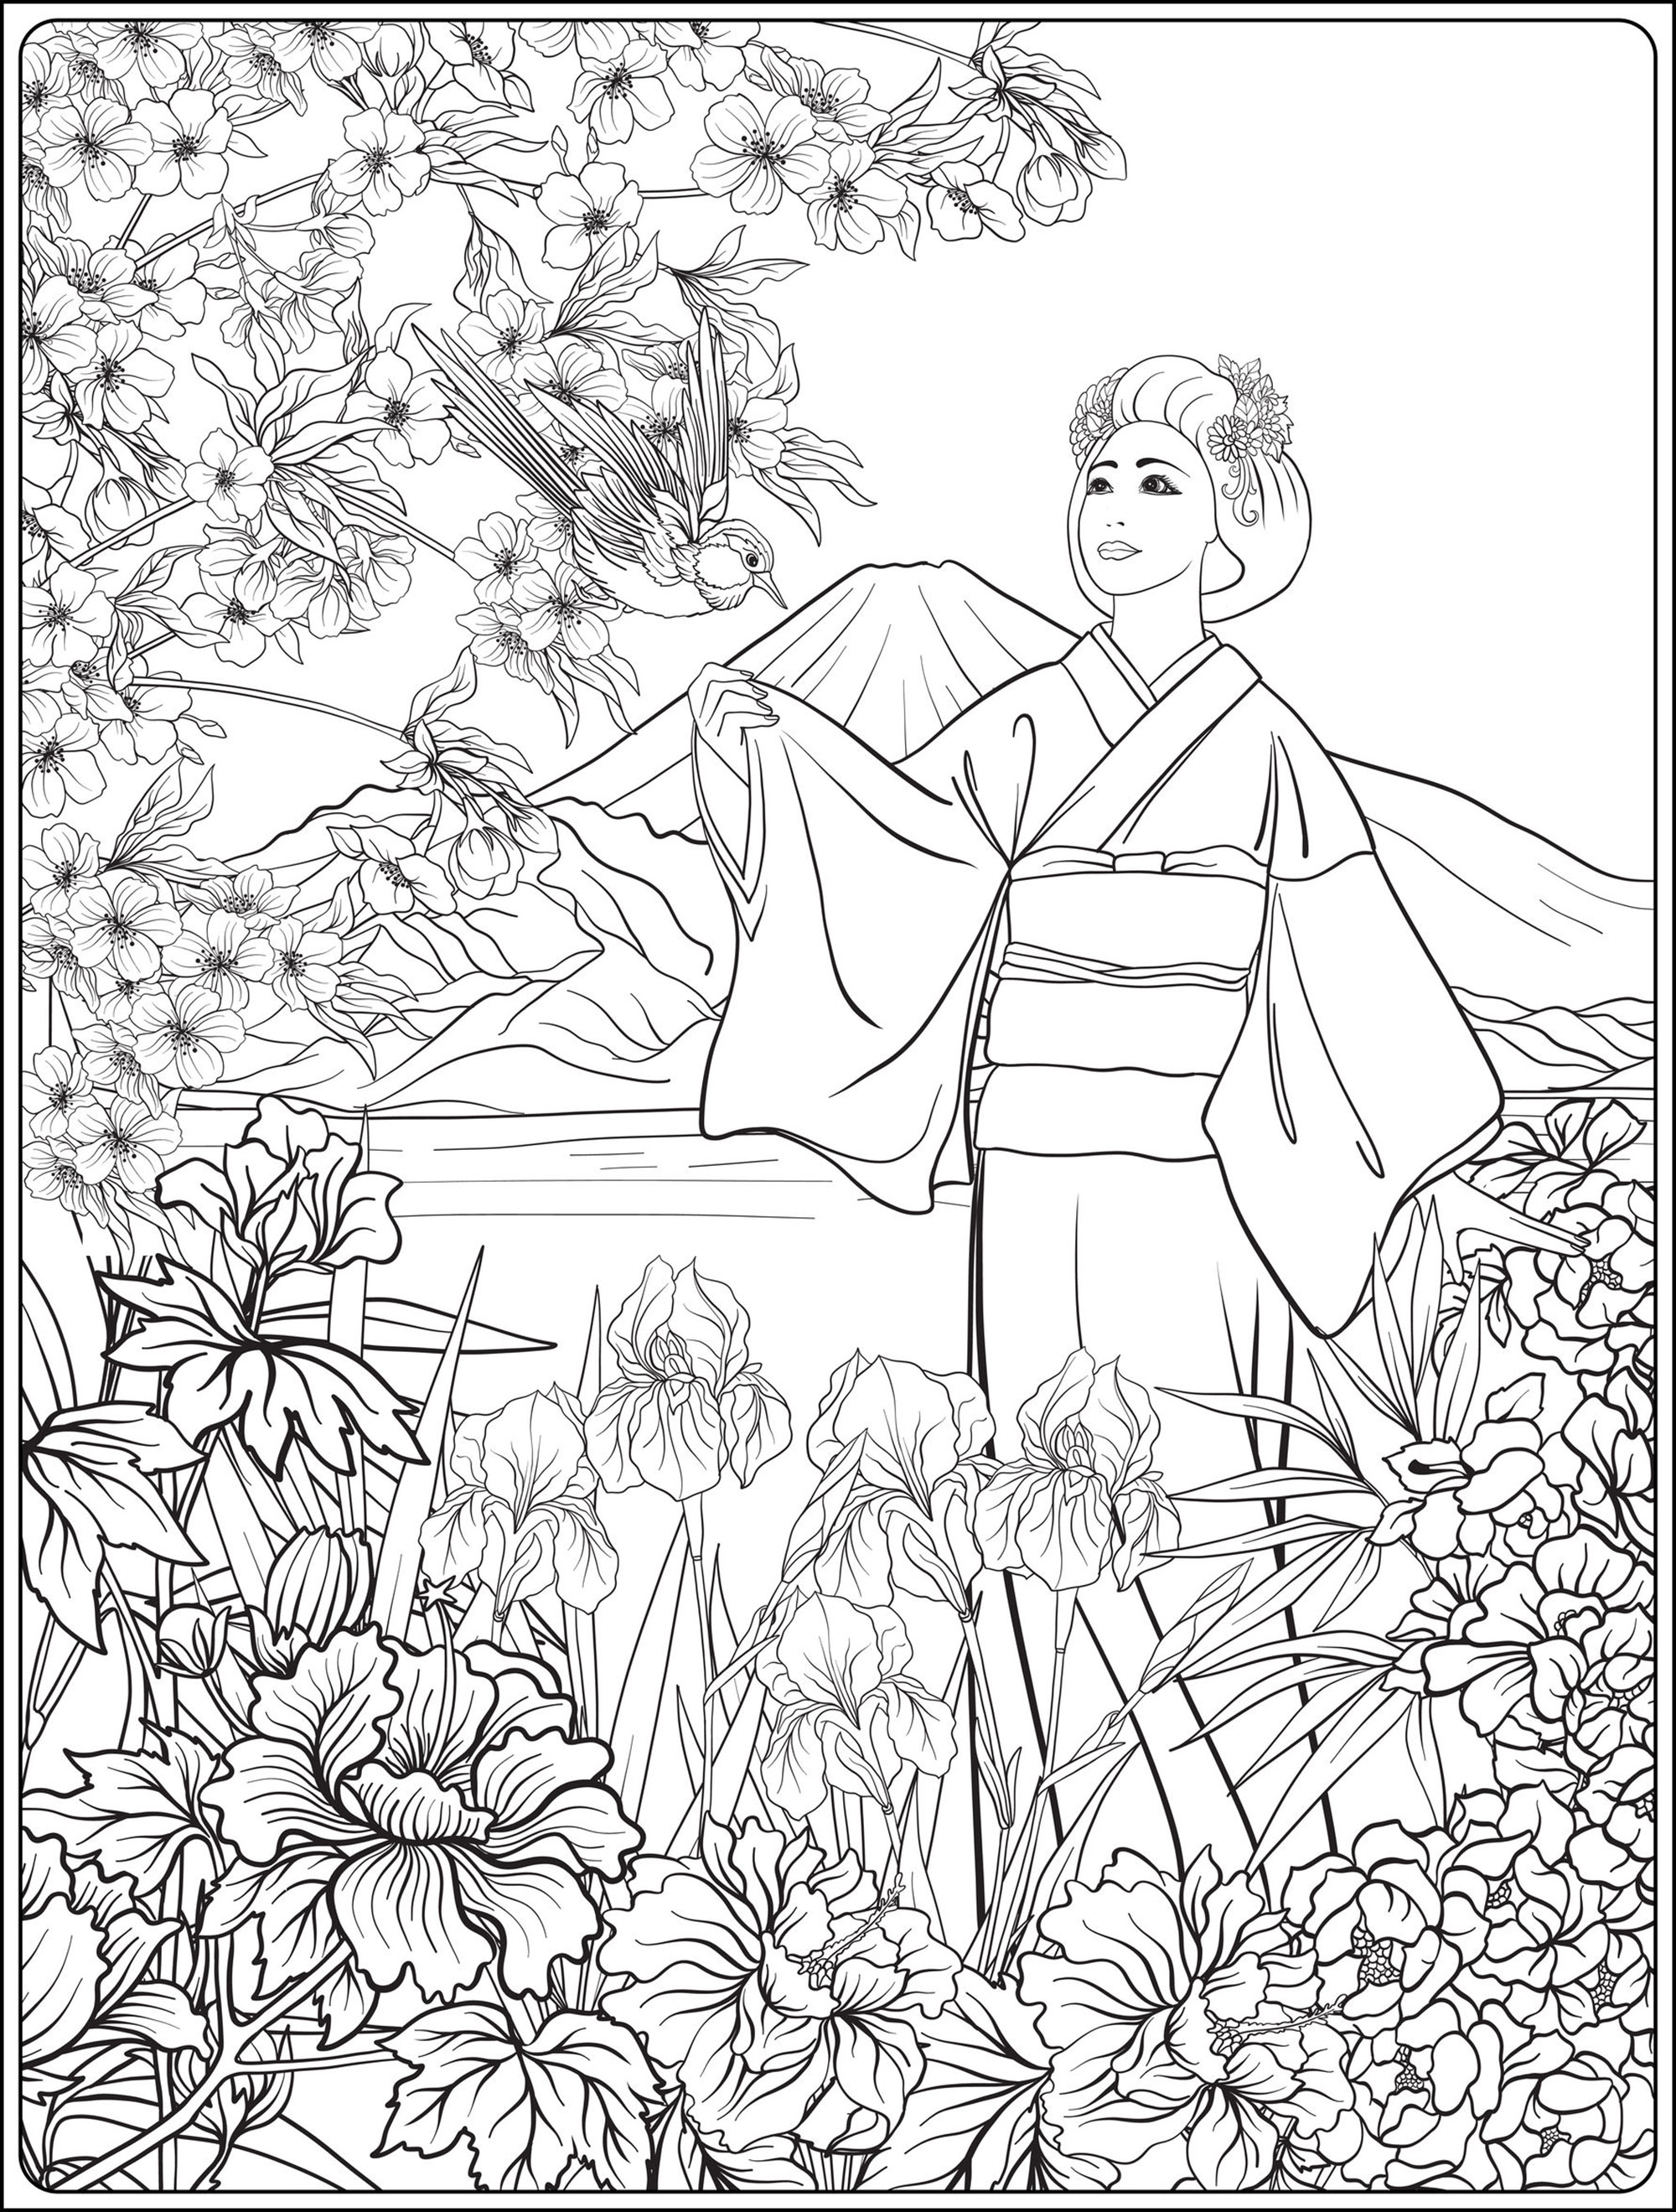 japanese-landscape-with-japanese-woman-in-kimono-japan-adult-coloring